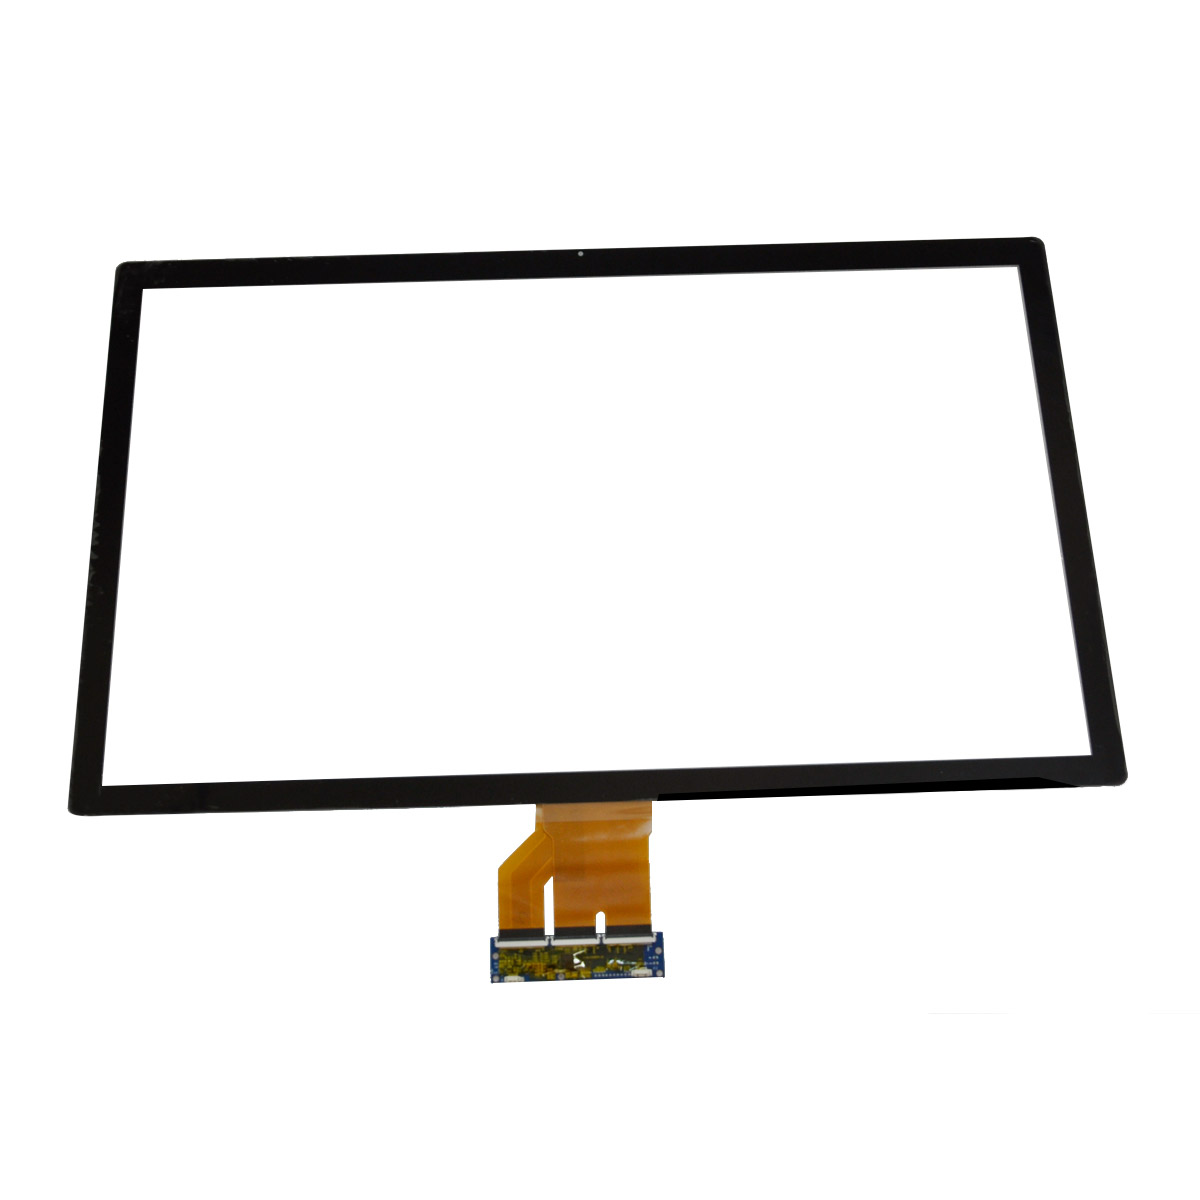 43 inch Projected Capacitive touch screen panel PCAP/PCT EETI/ilitek Controller